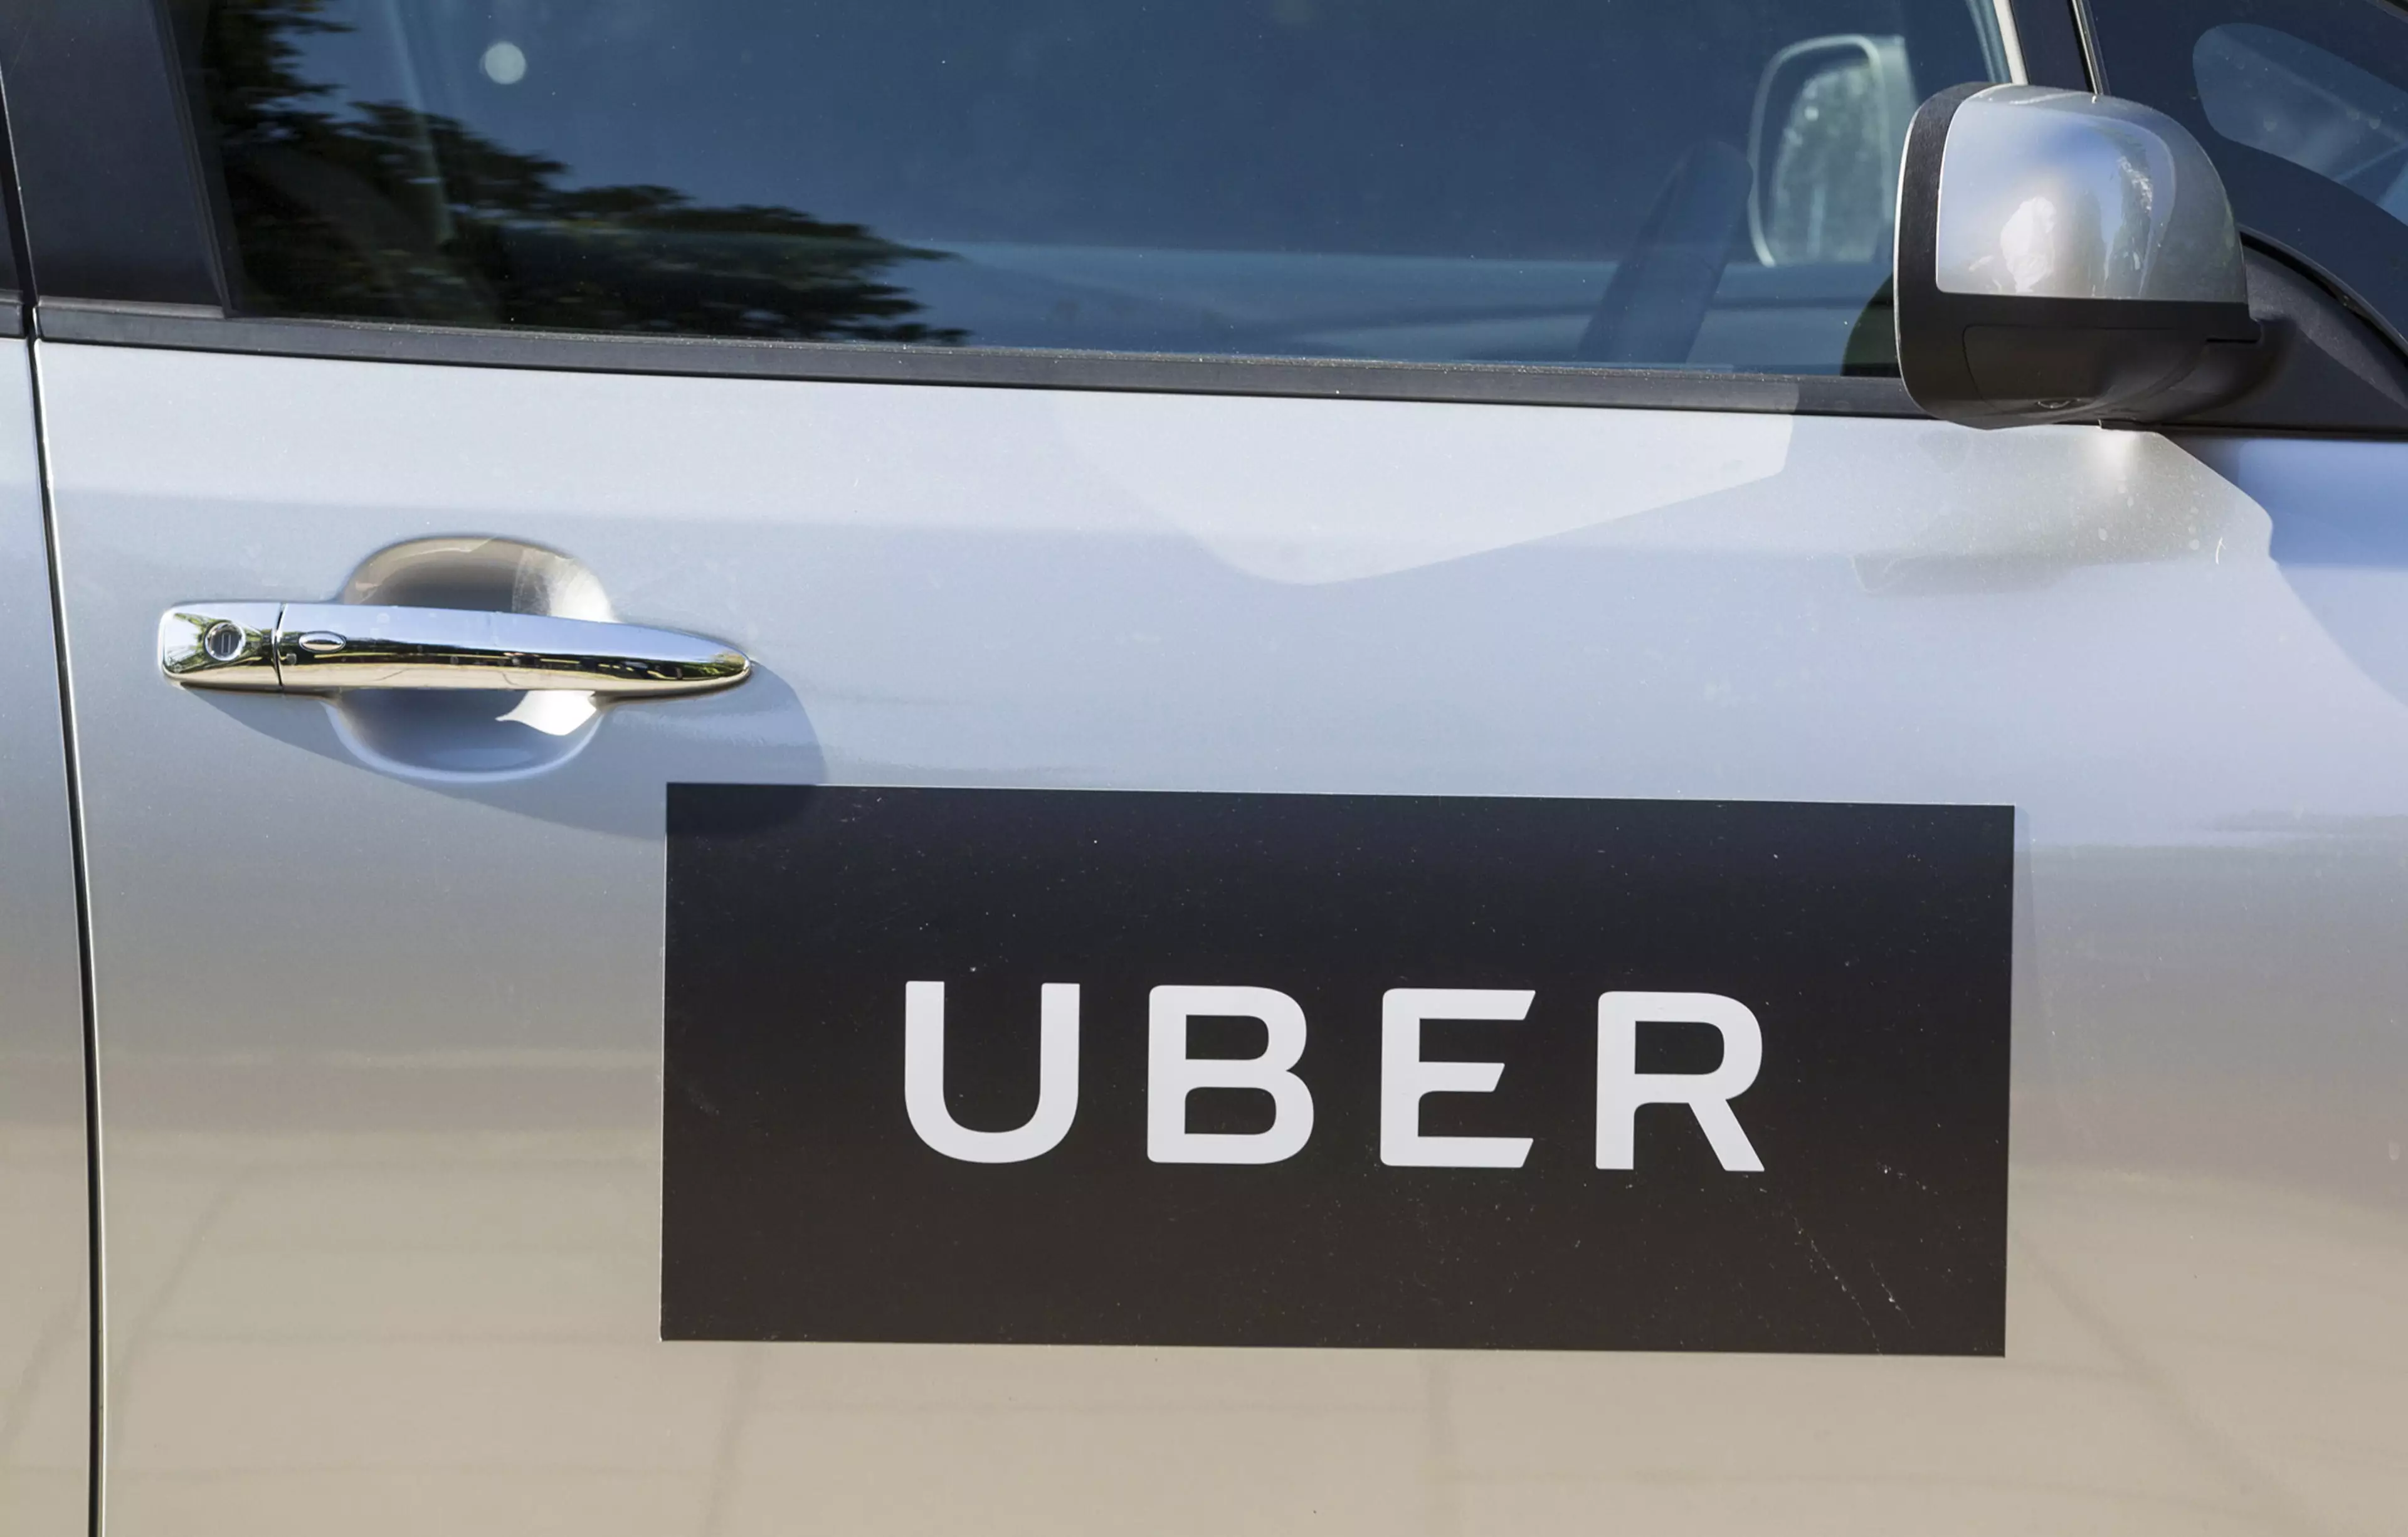 Uber temporarily suspended the account of the driver.